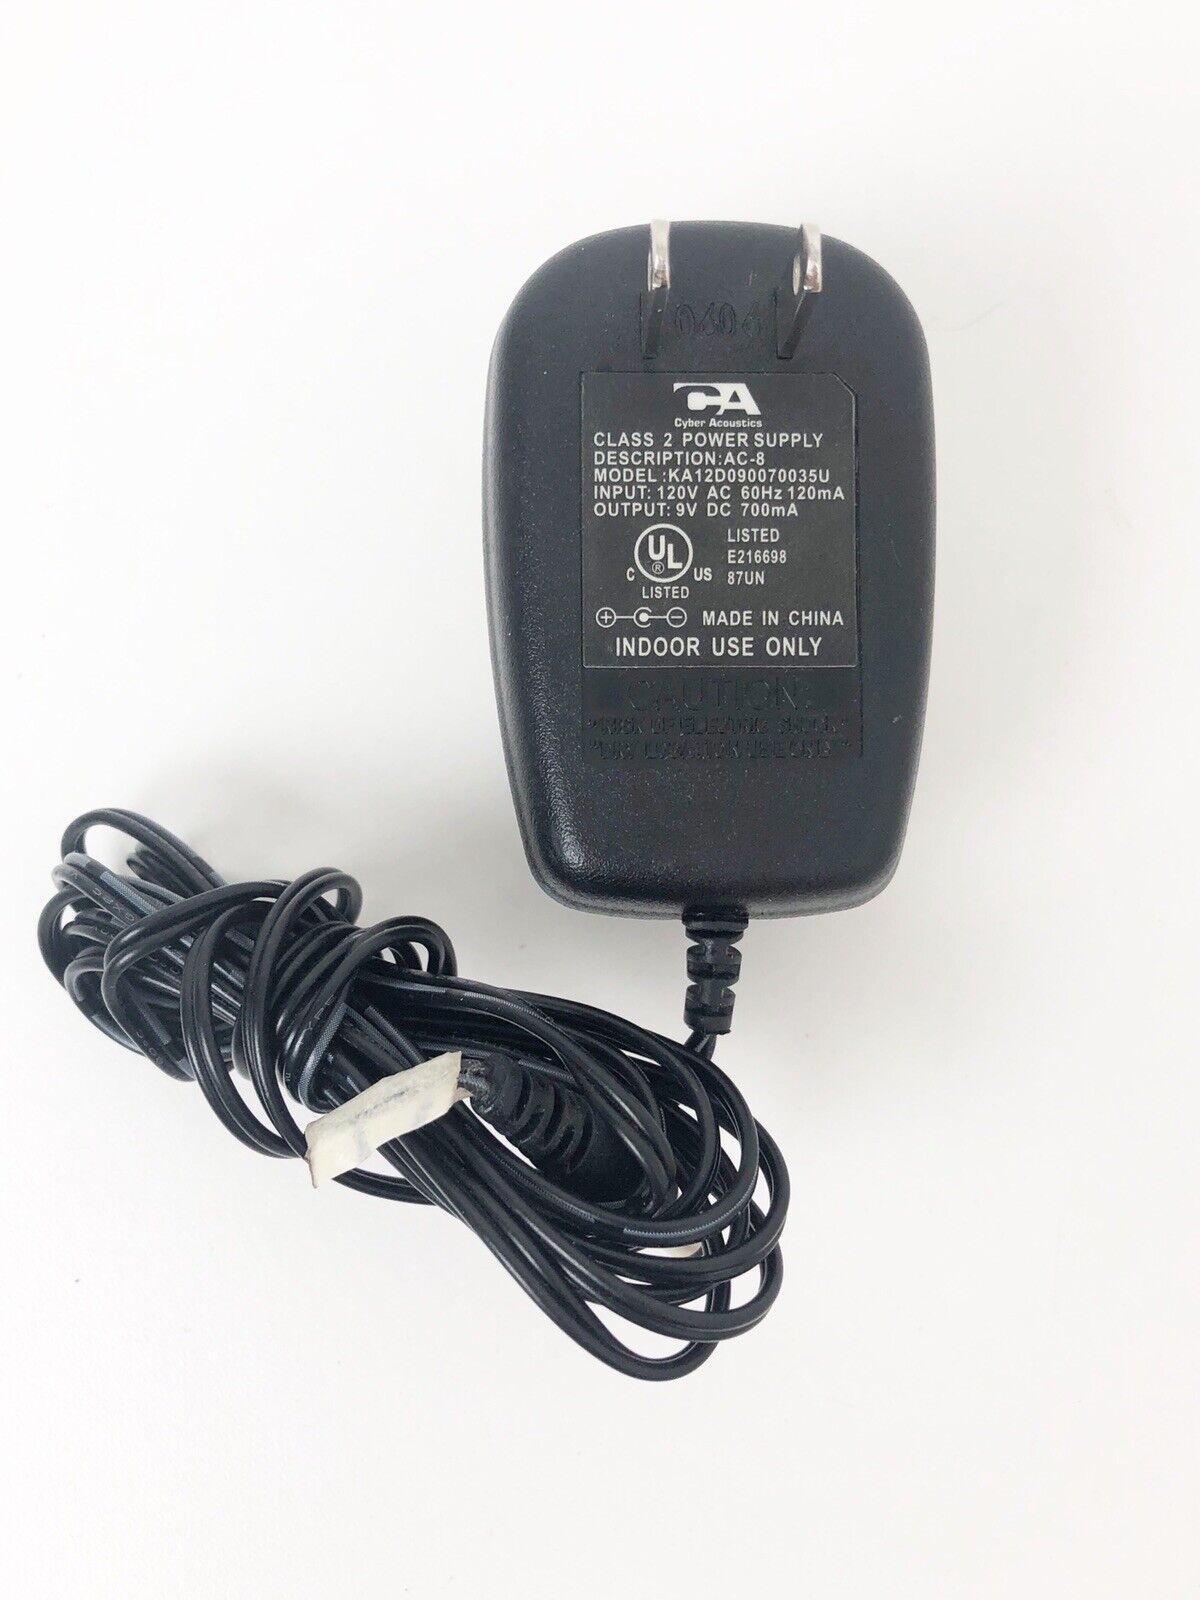 *Brand NEW*Cyber Acoustics KA12D090070035u Charger 9 Volts 700mA AC Adapter Power Supply - Click Image to Close